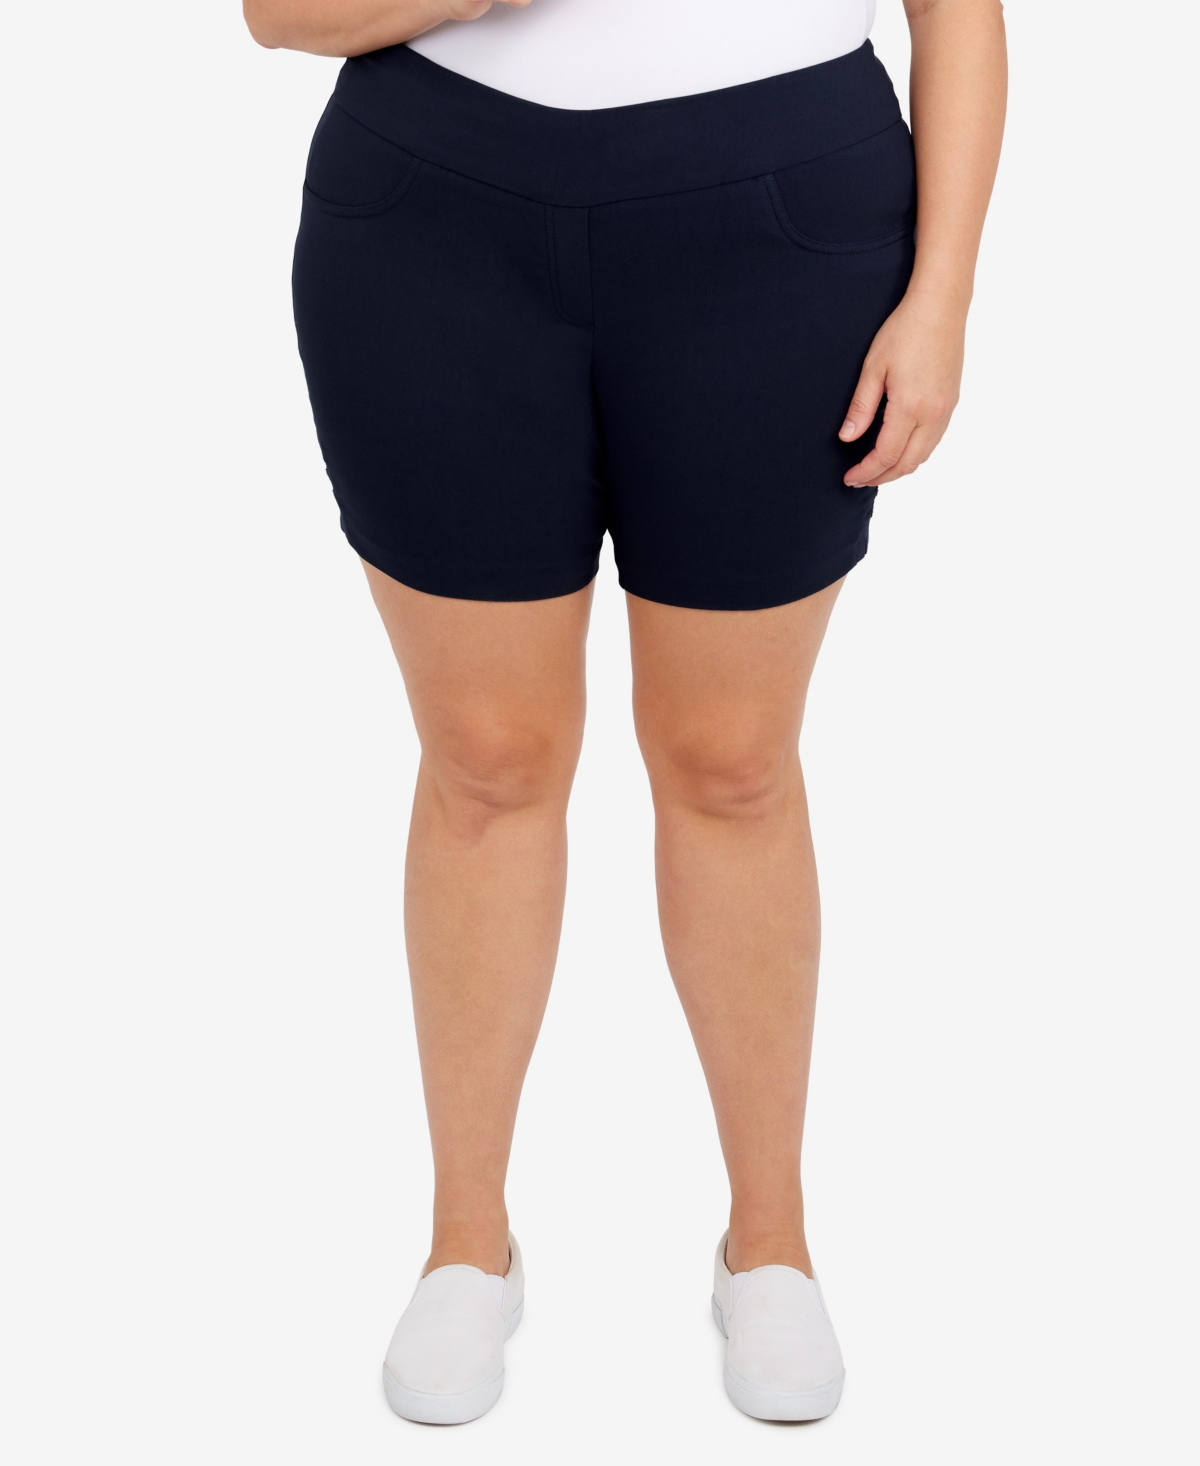 Hearts Of Palm Plus Size Essentials Solid Color Tech Stretch Shorts with Elastic Waistband